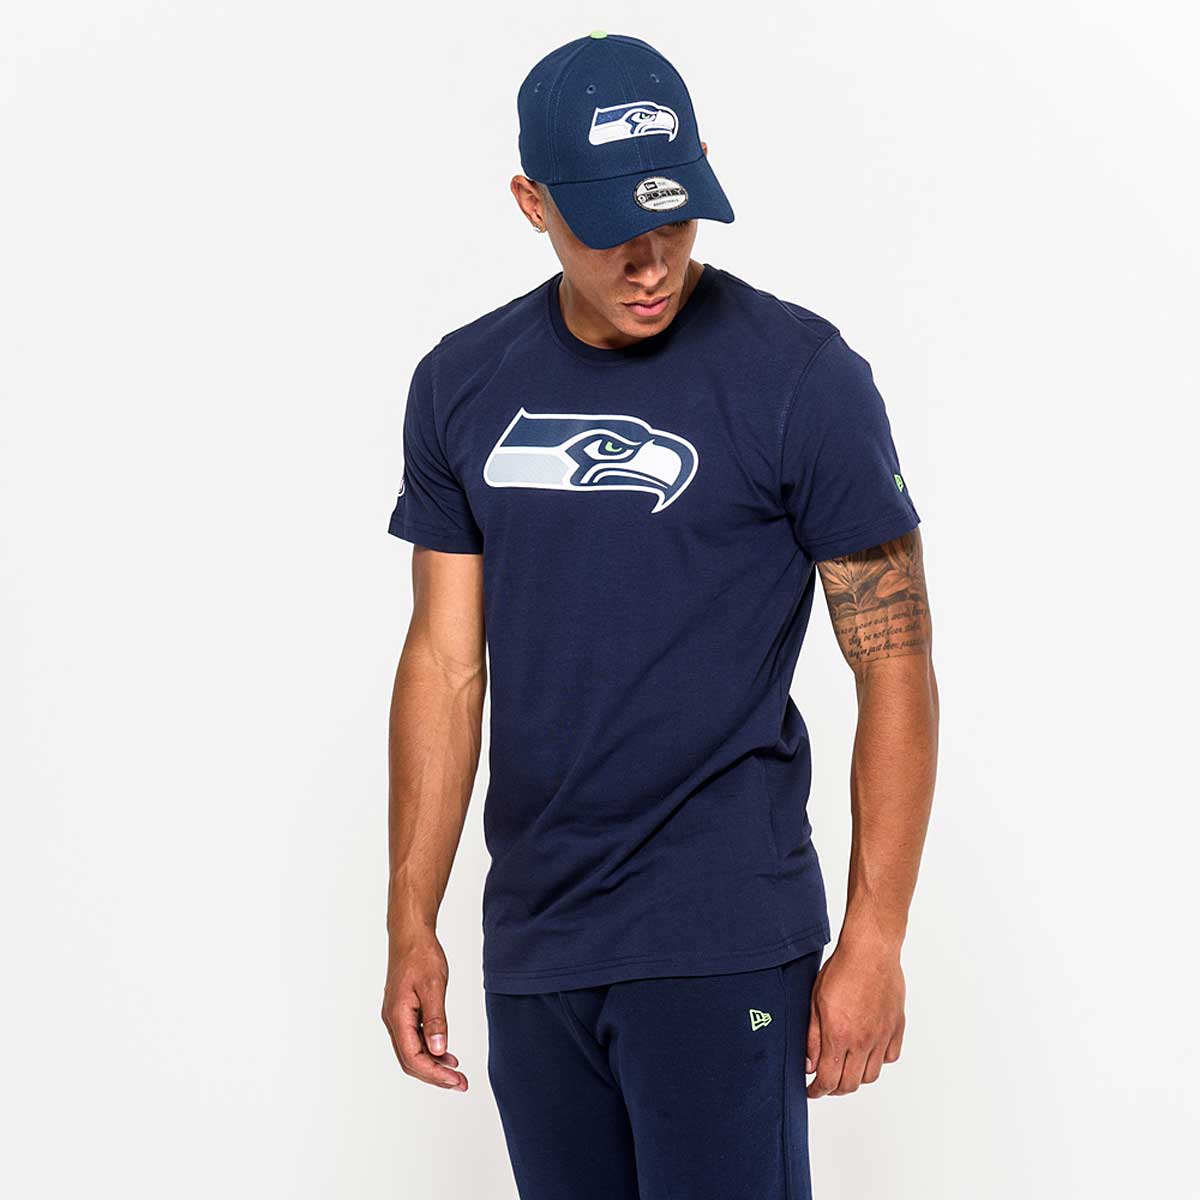 Buy NFL SEATTLE SEAHAWKS TEAM LOGO T-SHIRT for N/A 0.0 on !